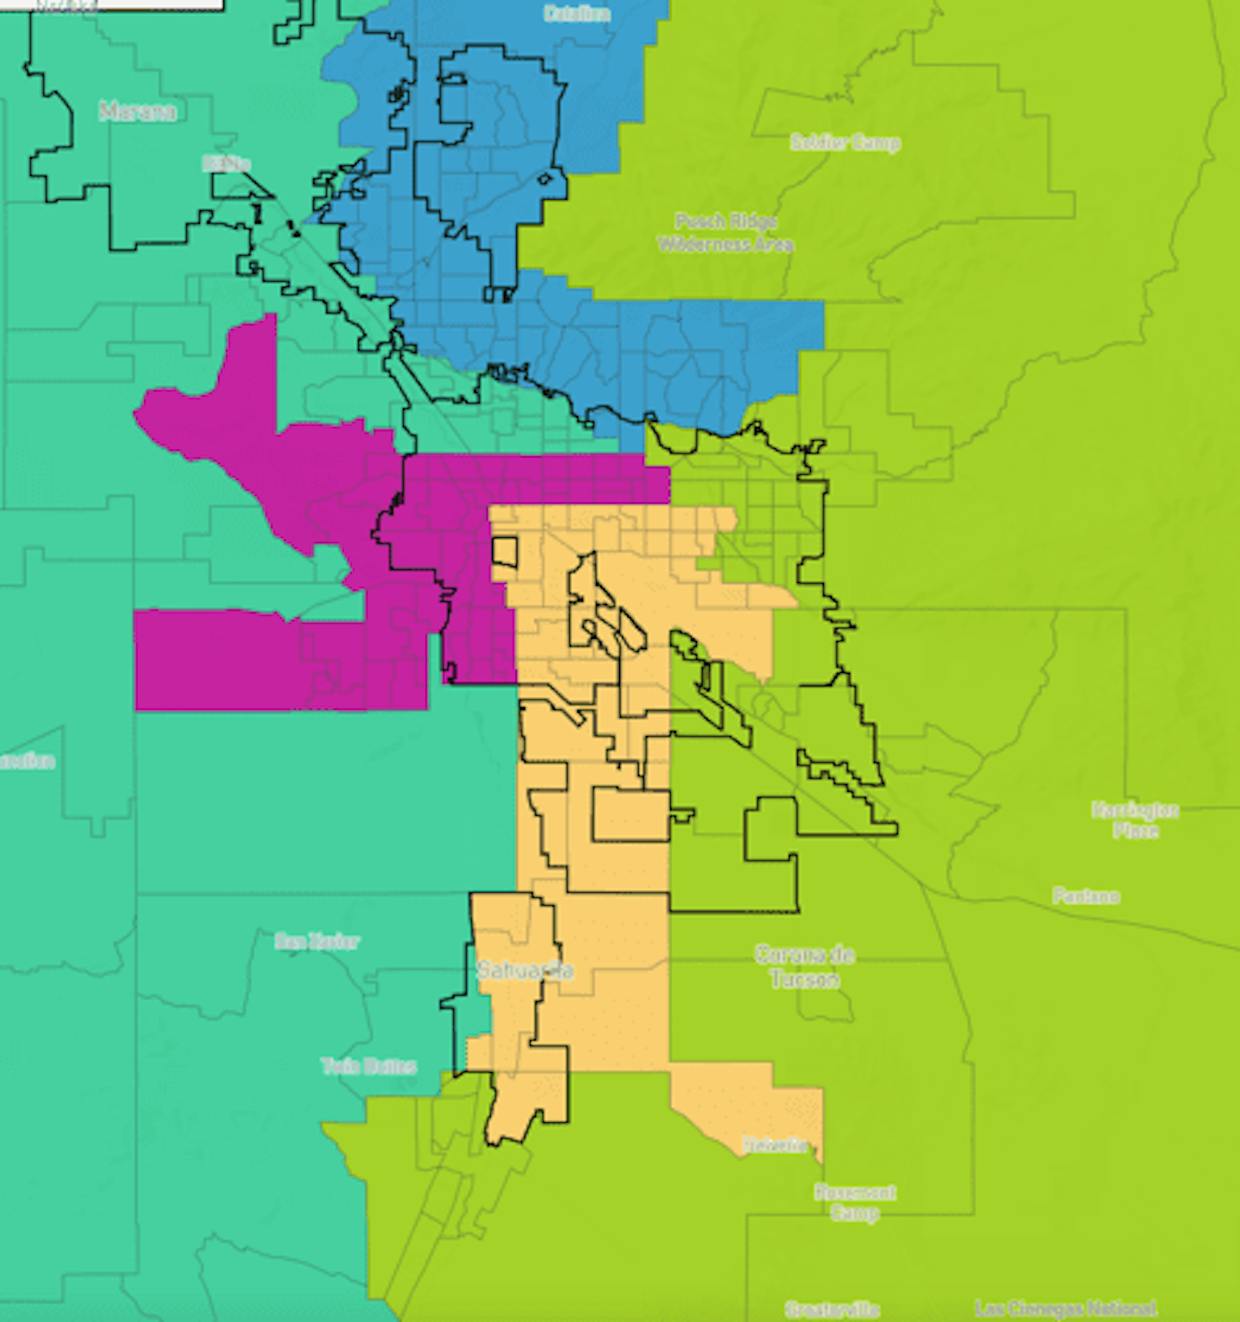 The Pima County Redistricting Committee's recommended map with jurisdictional boundaries outlined (in black). The map shows the new proposed boundaries for supervisorial districts 1 (blue), 2 (yellow), 3 (aqua), 4 (green) and 5 (pink). (Pima County)